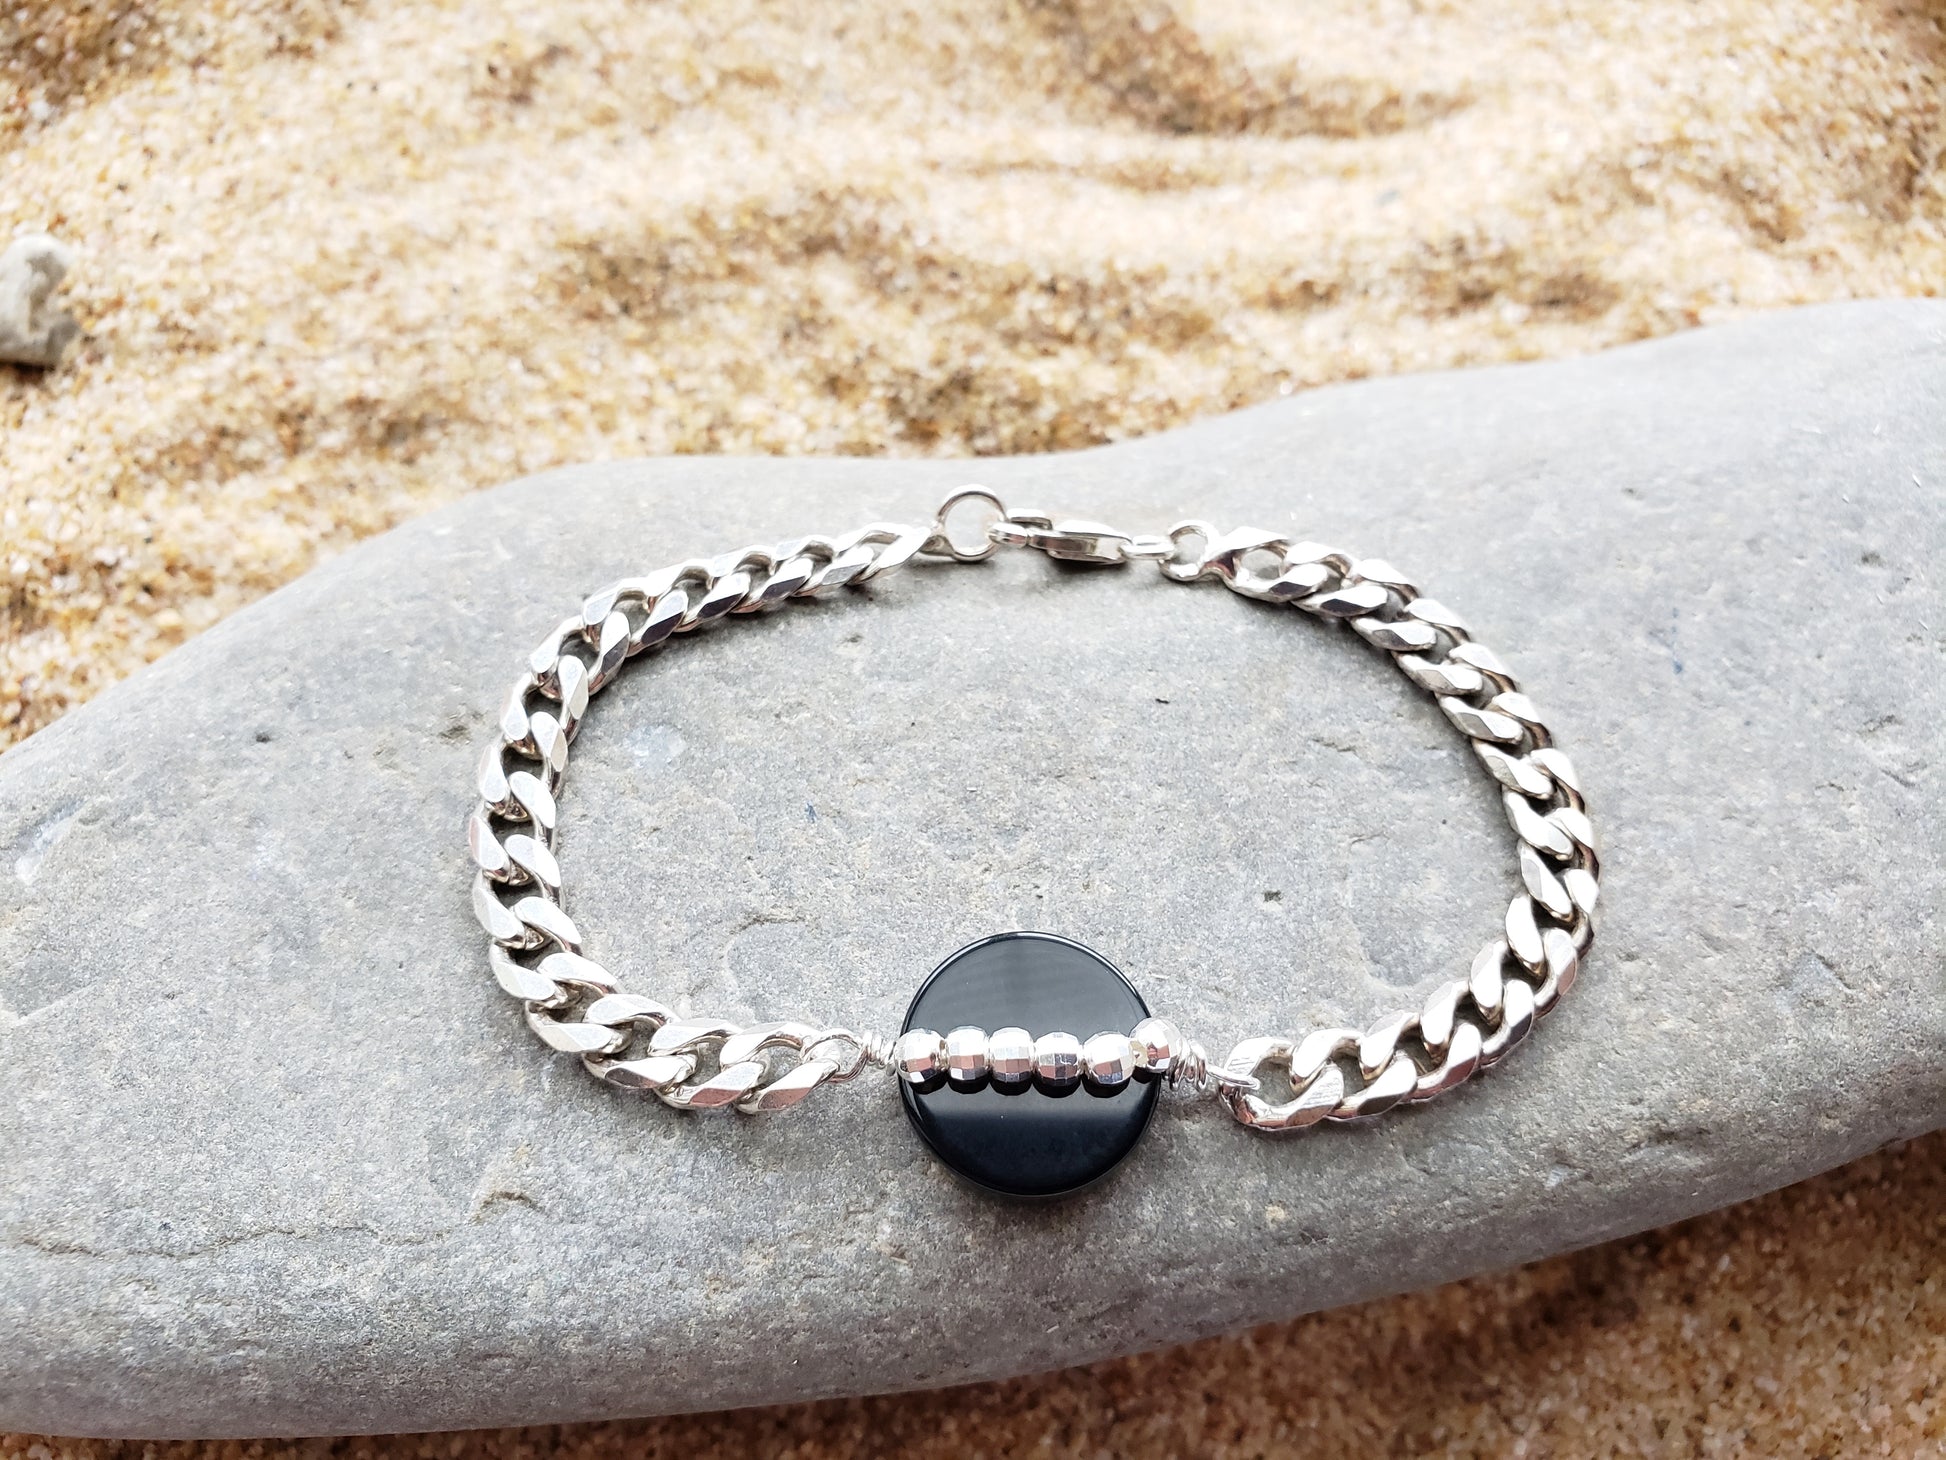 Path of Light Black Onyx Bracelet, Upcycled, Repurposed Sterling Silver Chain, round Disk shaped Onyx stone in centre with a line of sparkly Sterling Silver beads. Displayed on Stone